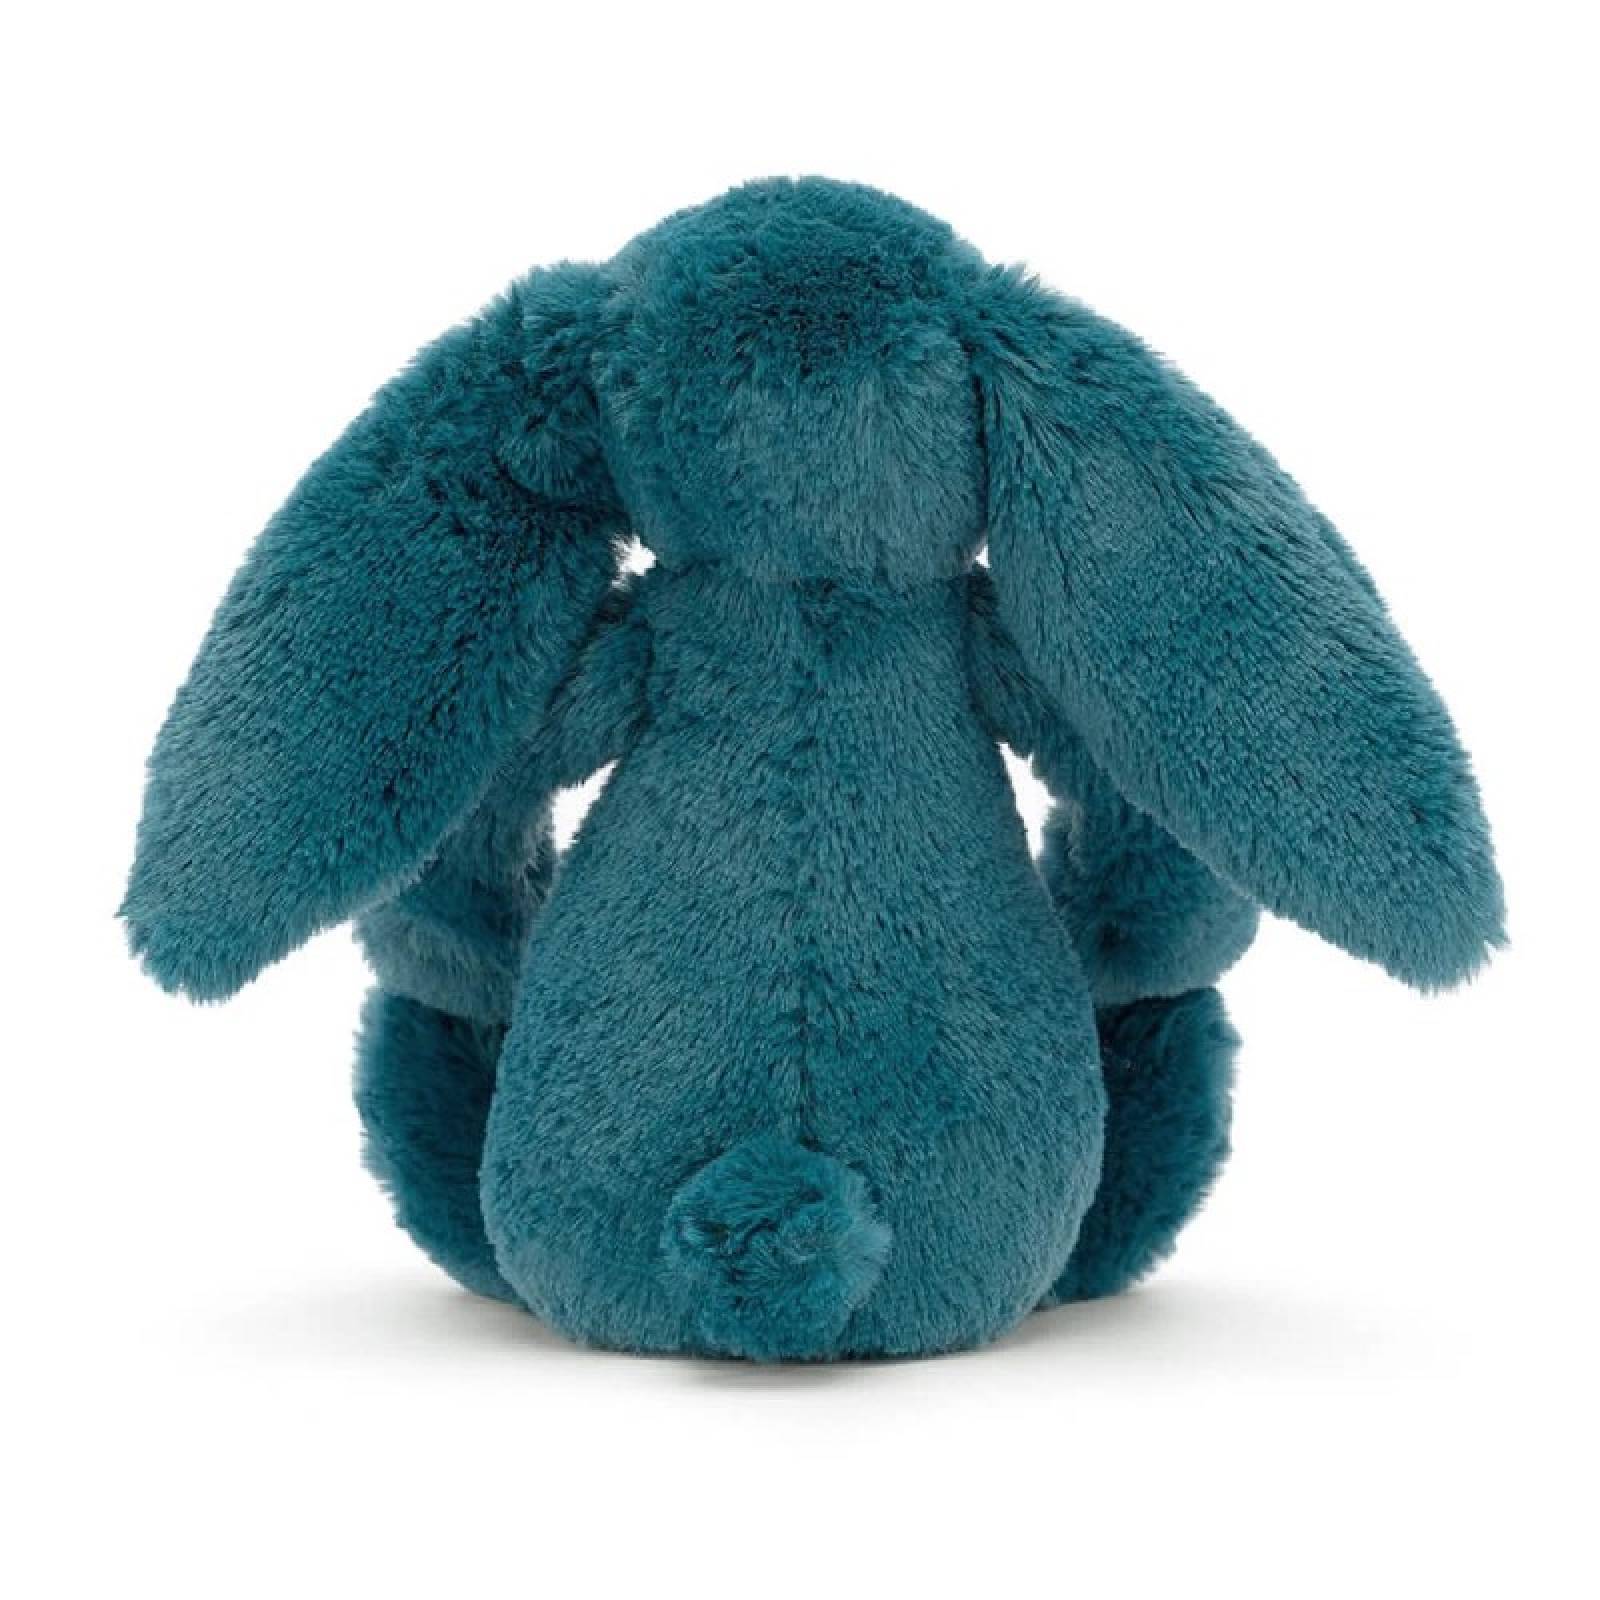 Small Bashful Bunny In Mineral Blue Soft Toy By Jellycat 0+ thumbnails